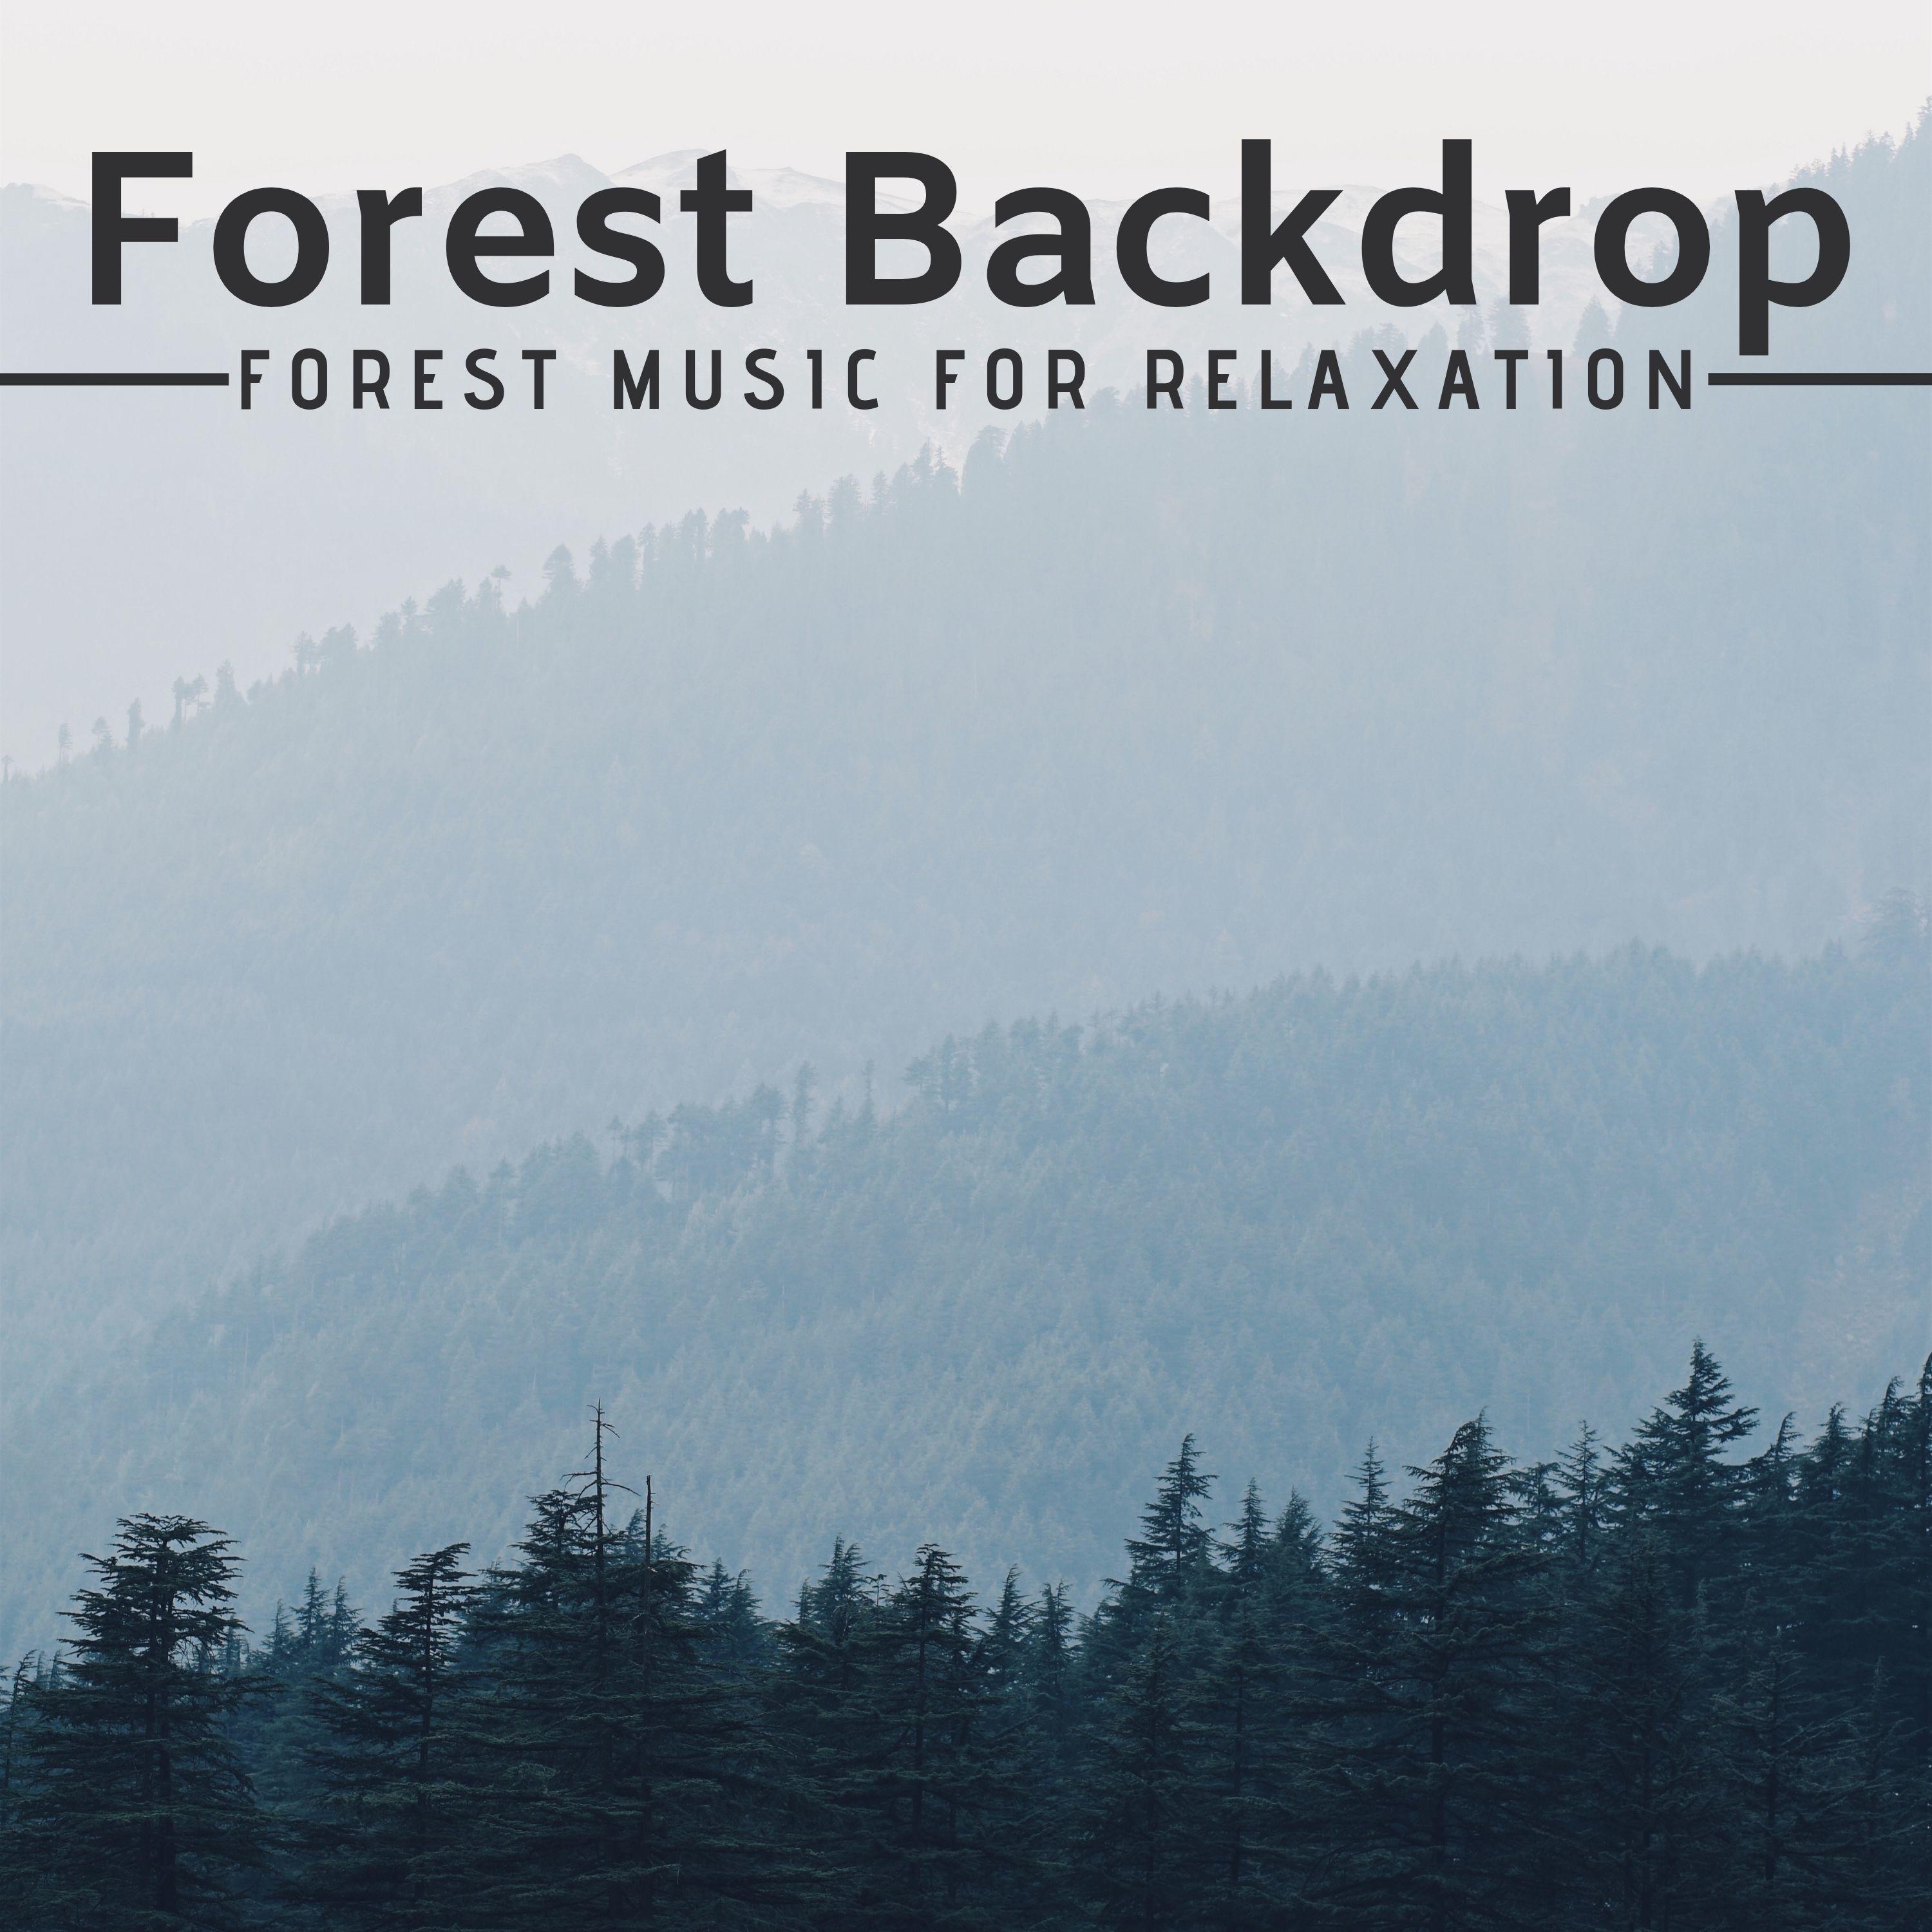 Forest Backdrop - Forest Music for Relaxation